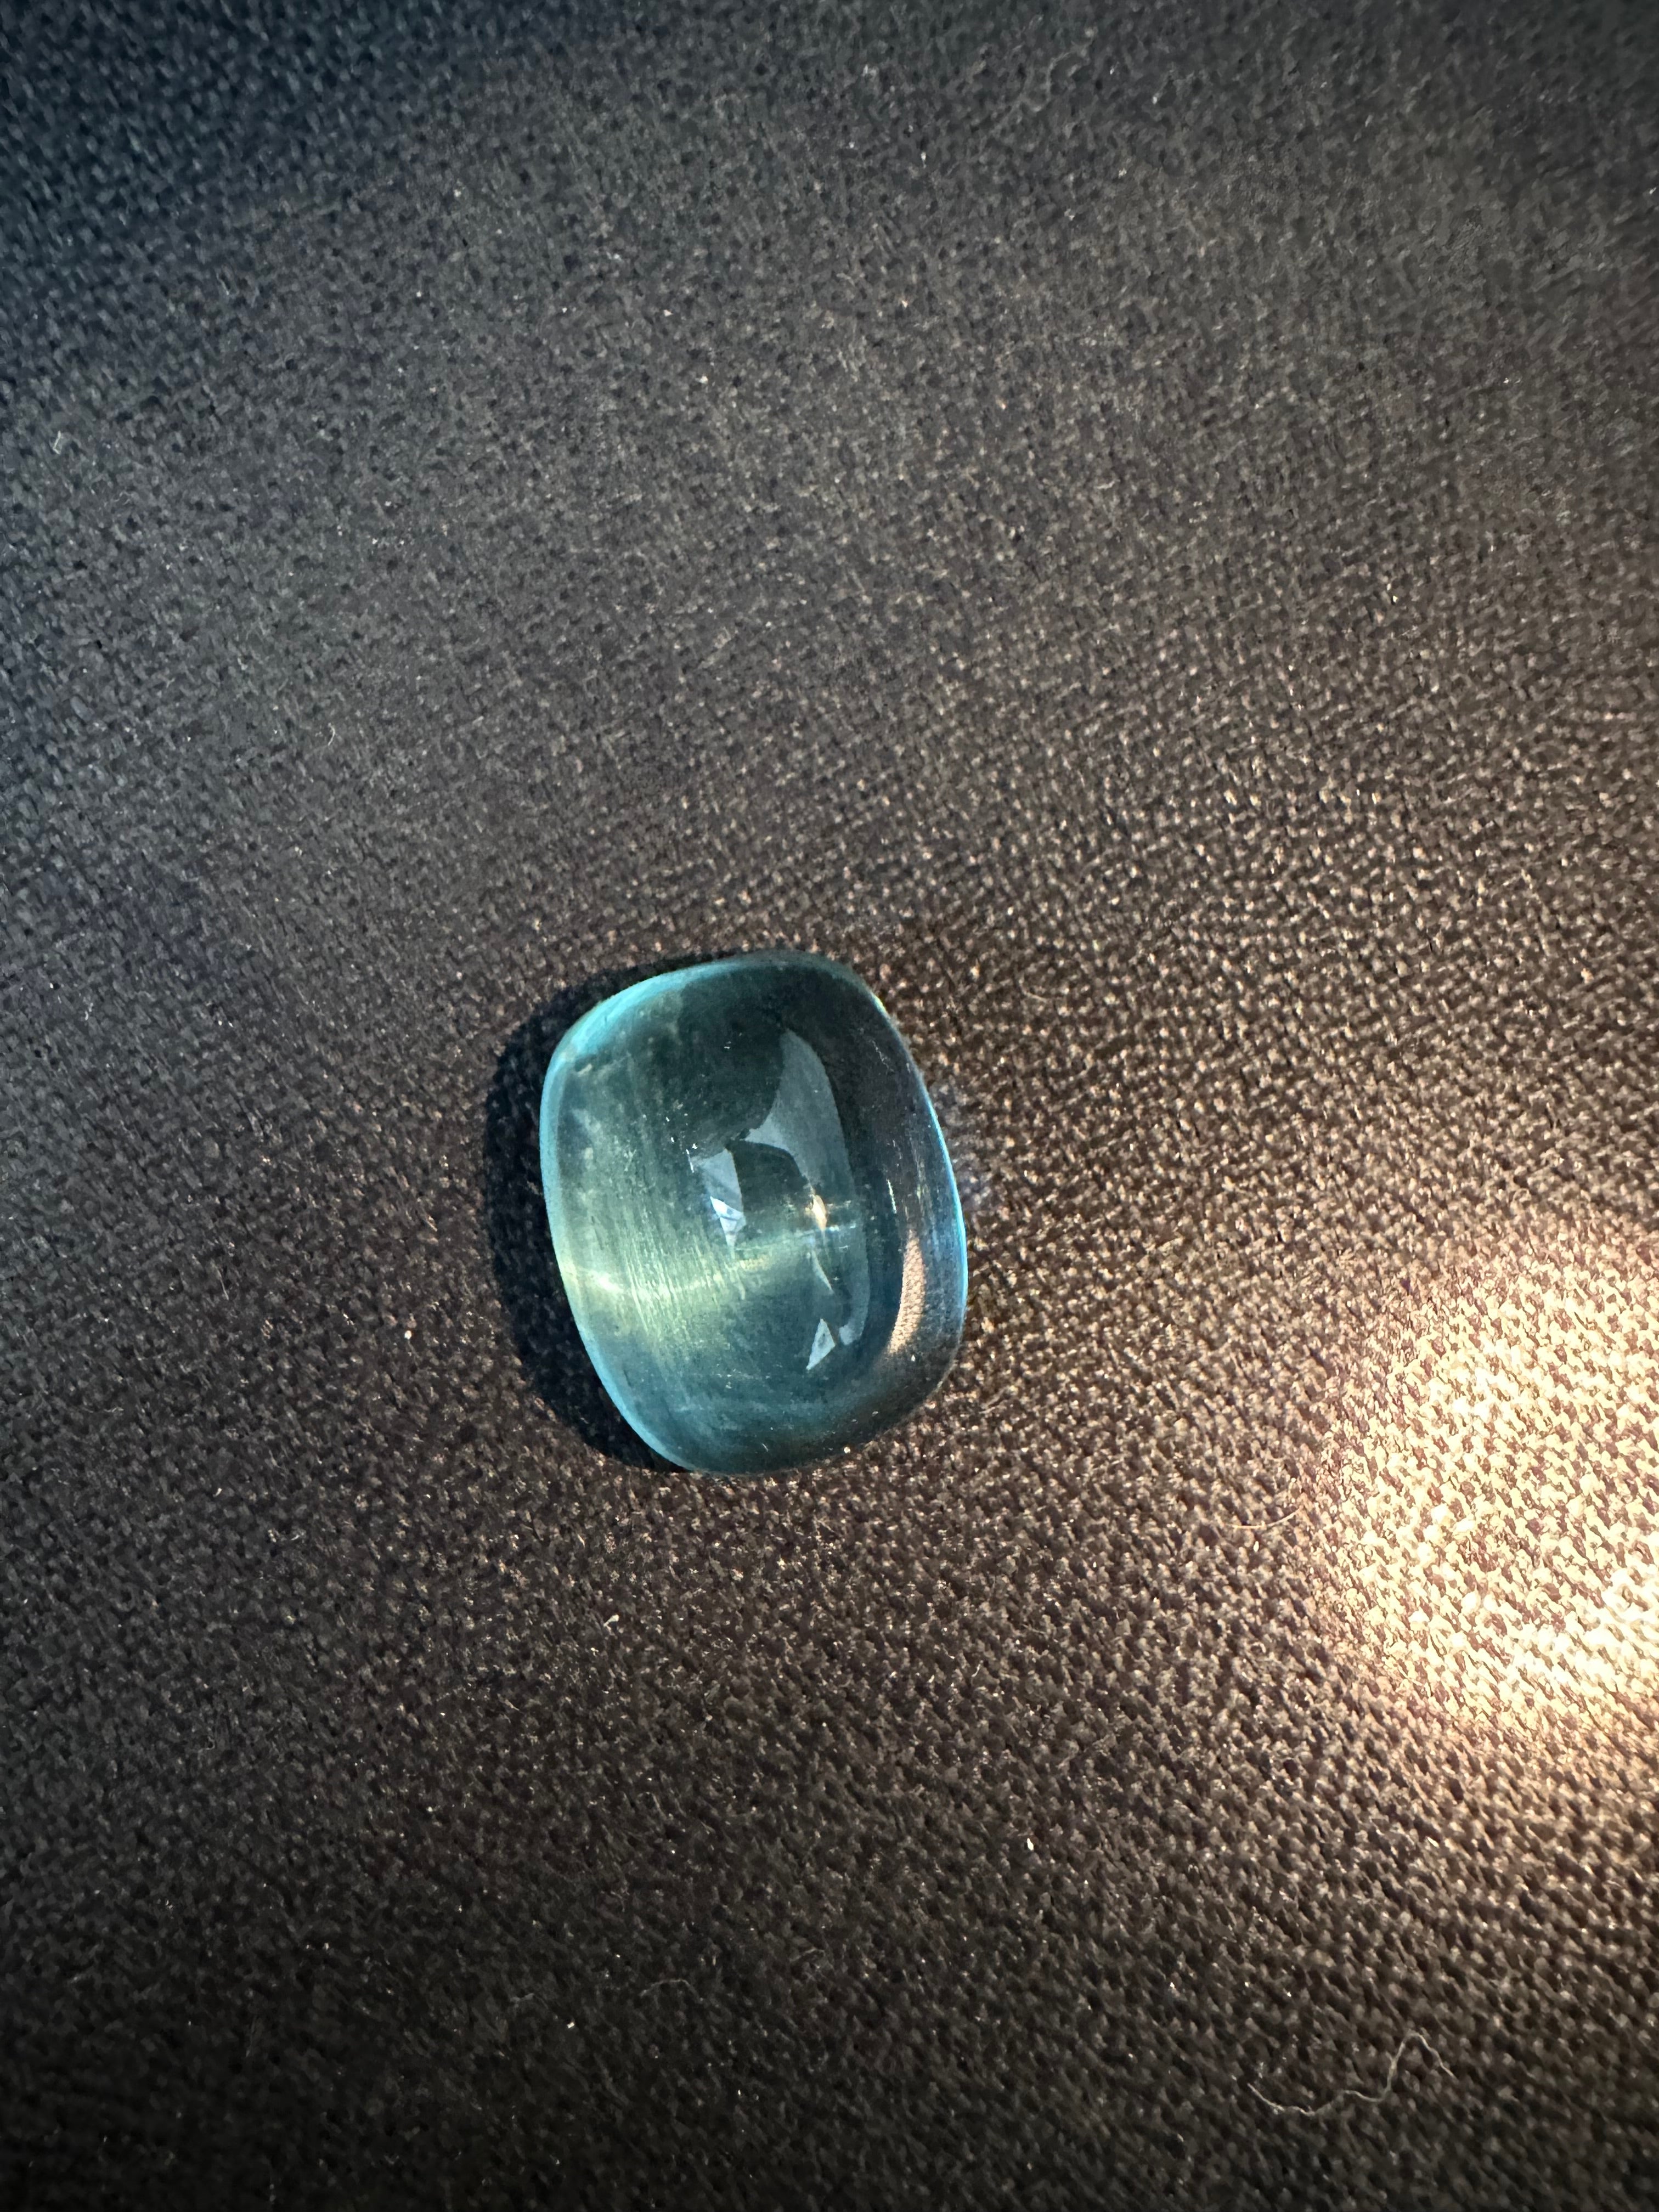 Fine needles inclusion in the stone oriented in a way to showcase a cats eye phenomenon when a direct overhead light is spotted.
Weight: 22.84 Carats
Size: 19x15 MM
Pieces: 1